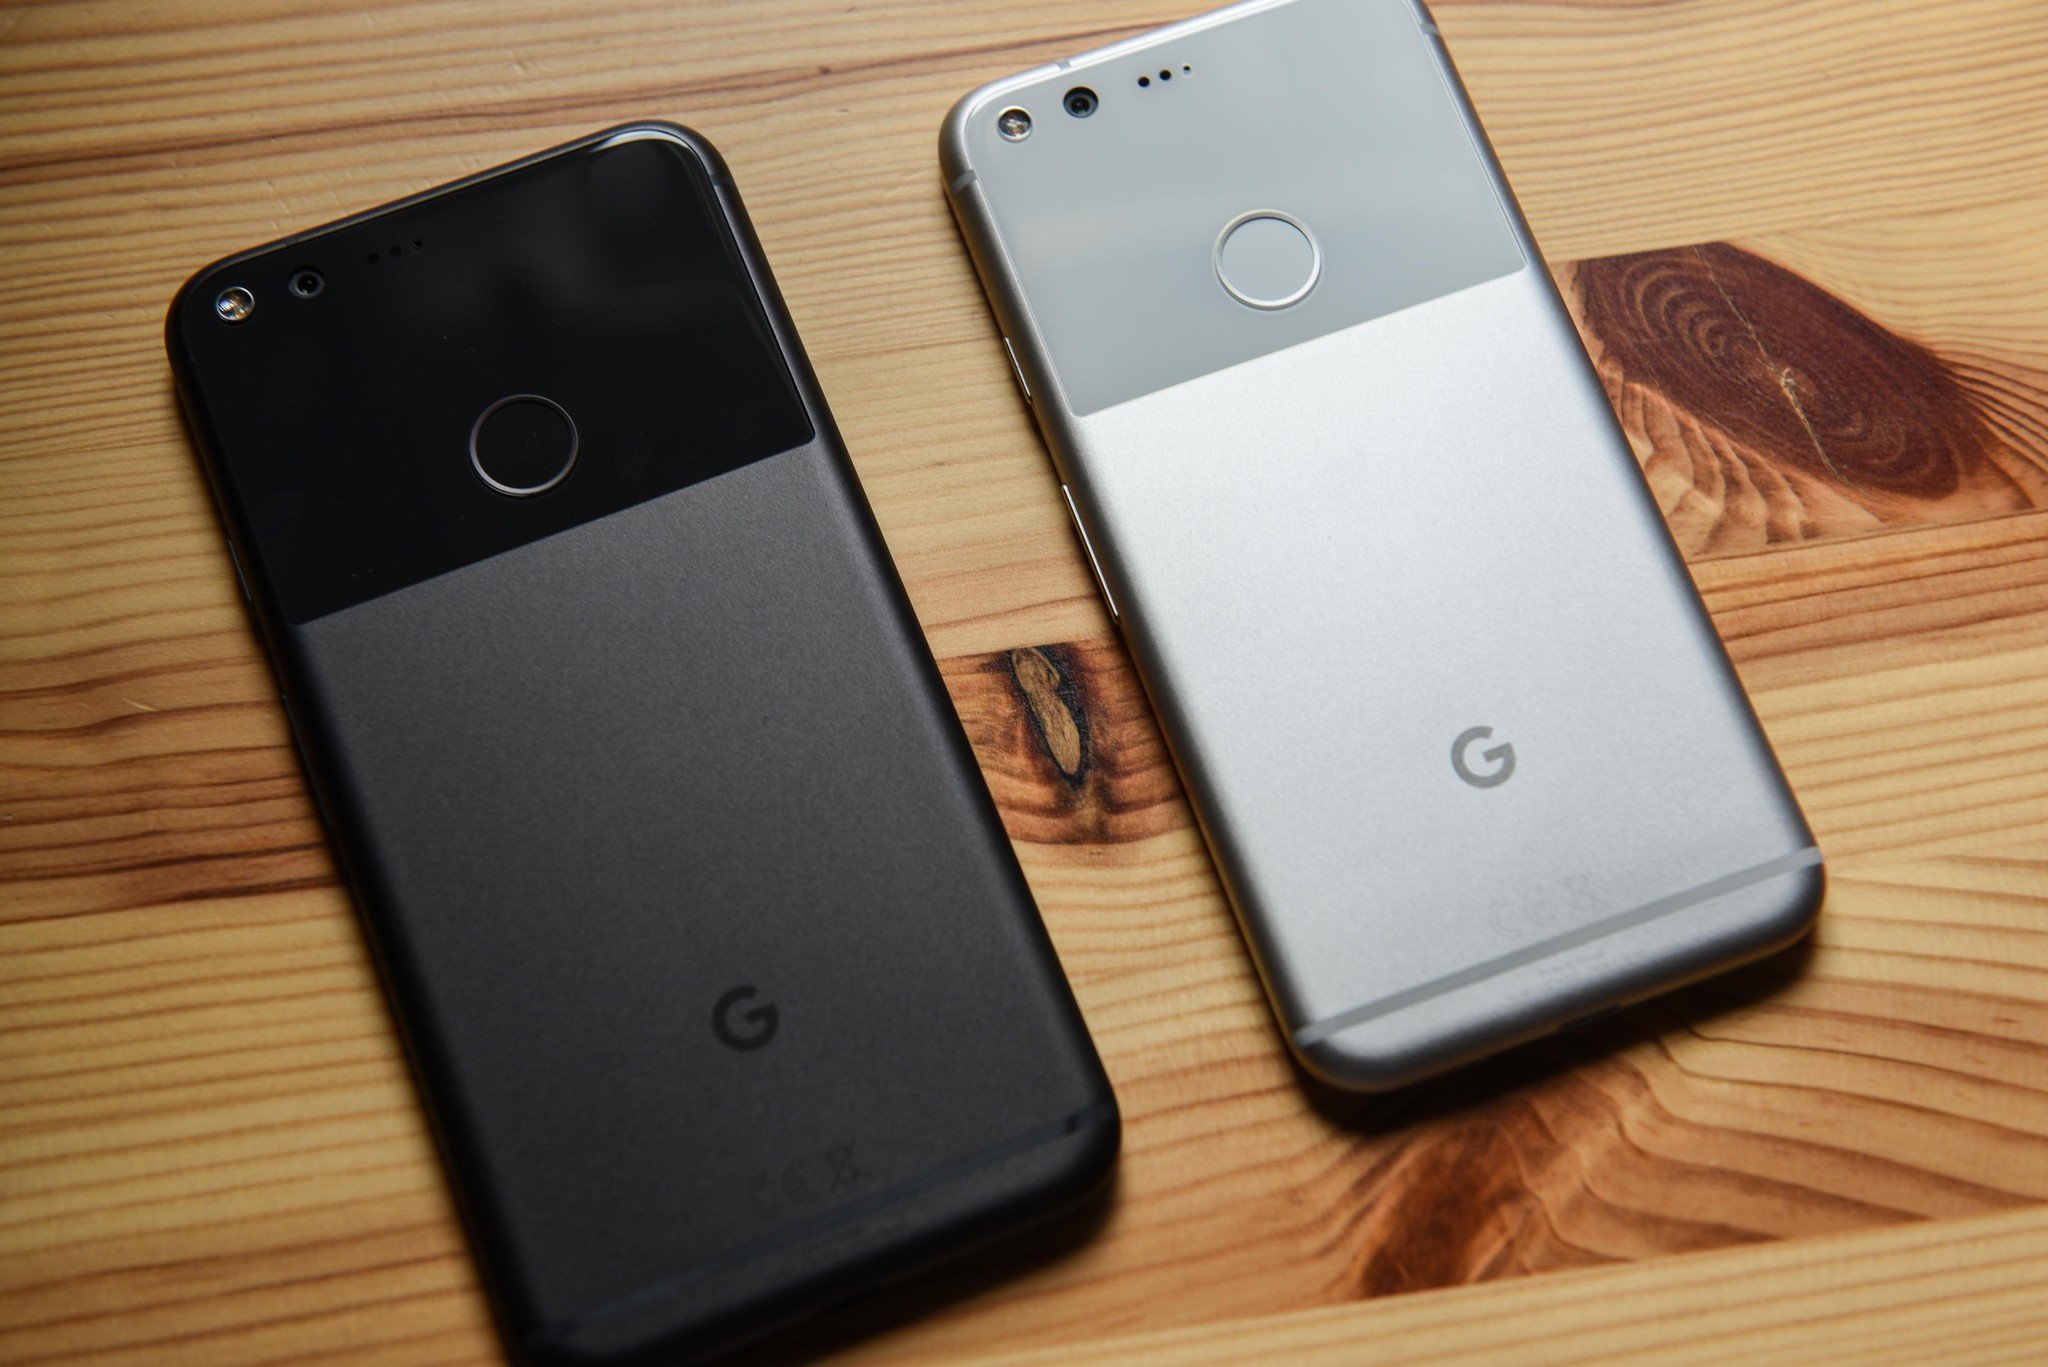 Google Pixel Vs Pixel Xl Which Should You Buy Android Central